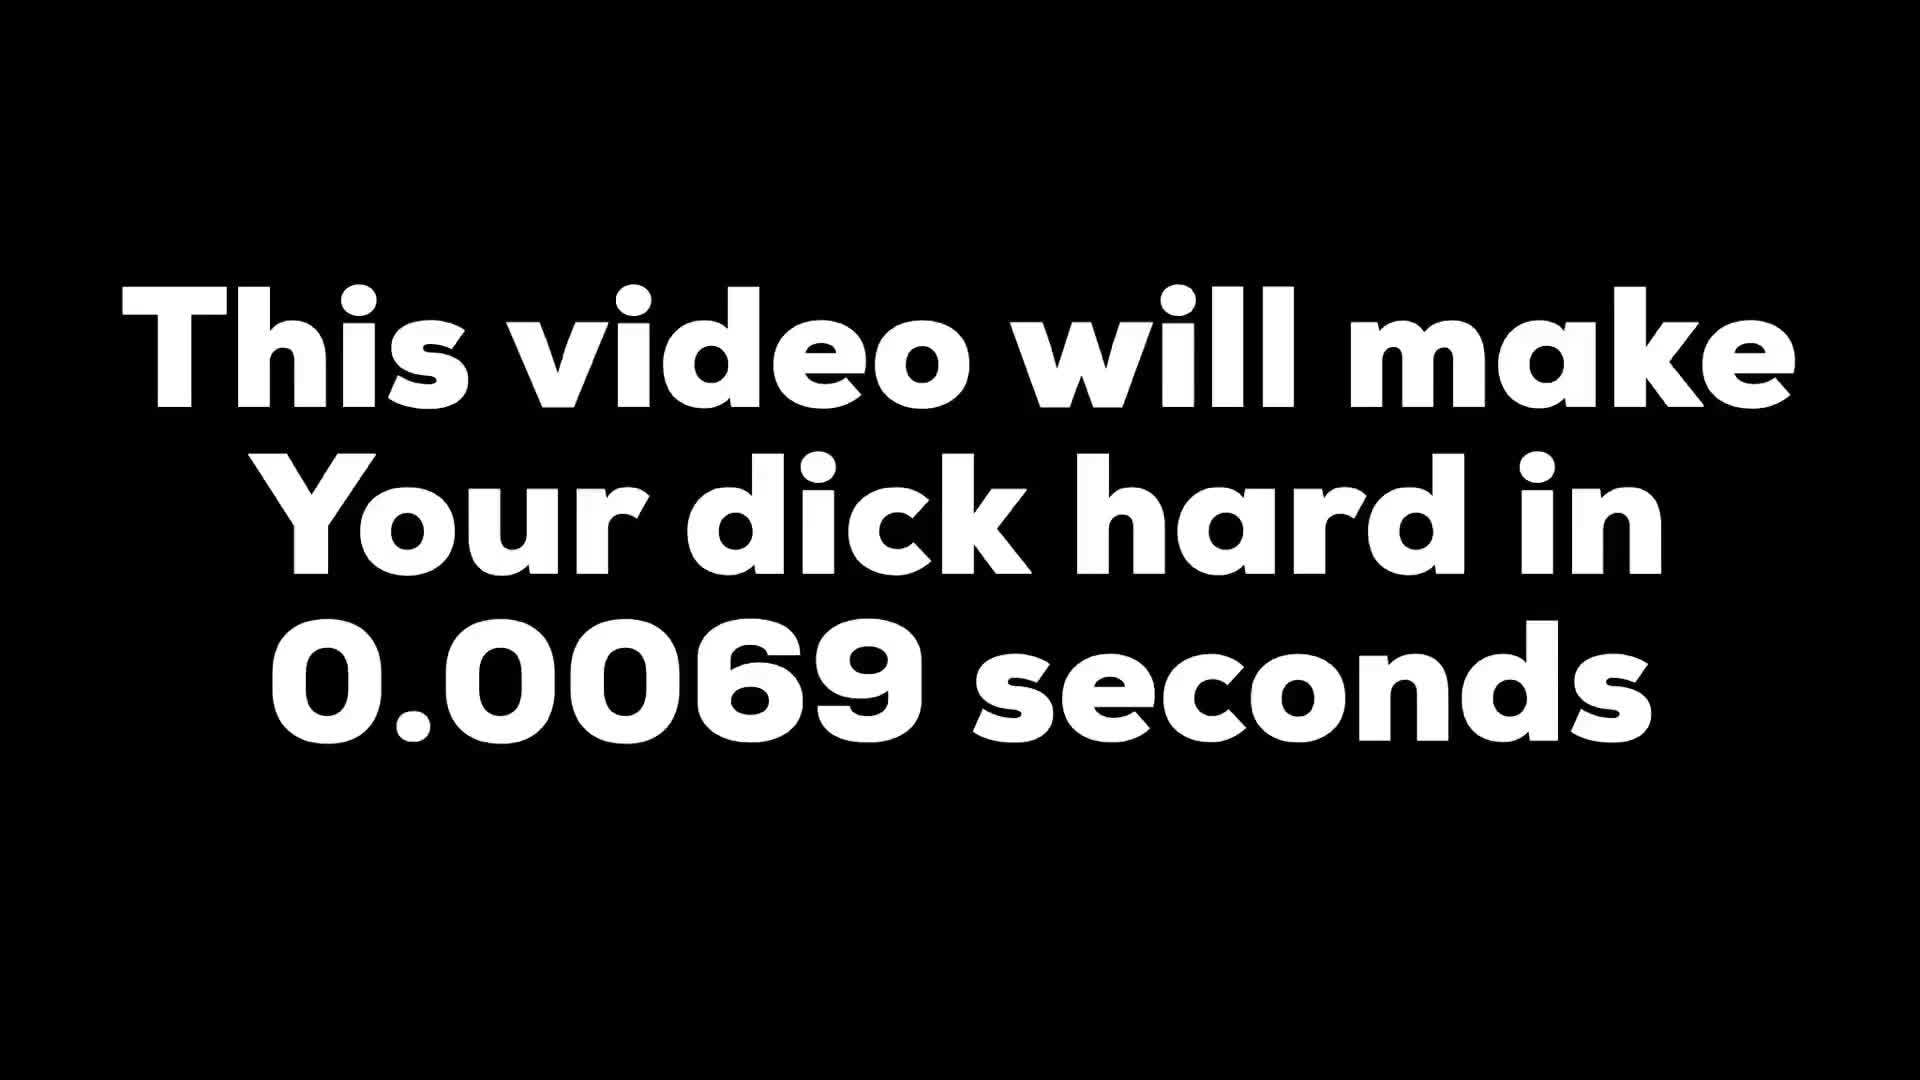 This will make your dick hard